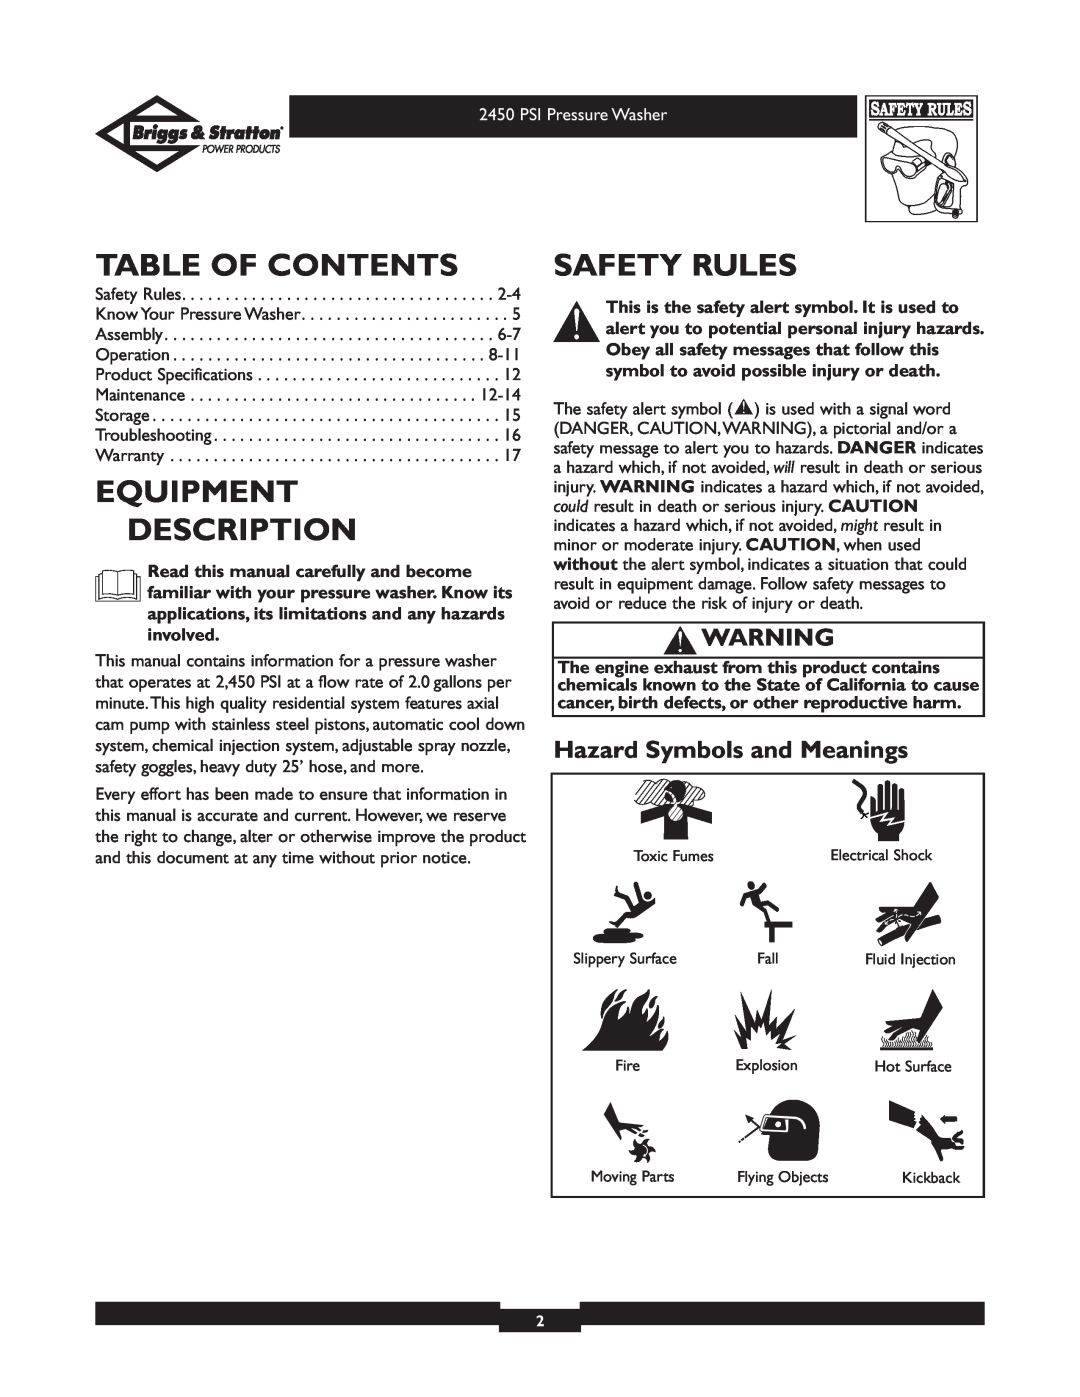 Briggs & Stratton 020219 owner manual Table Of Contents, Equipment Description, Safety Rules, Hazard Symbols and Meanings 